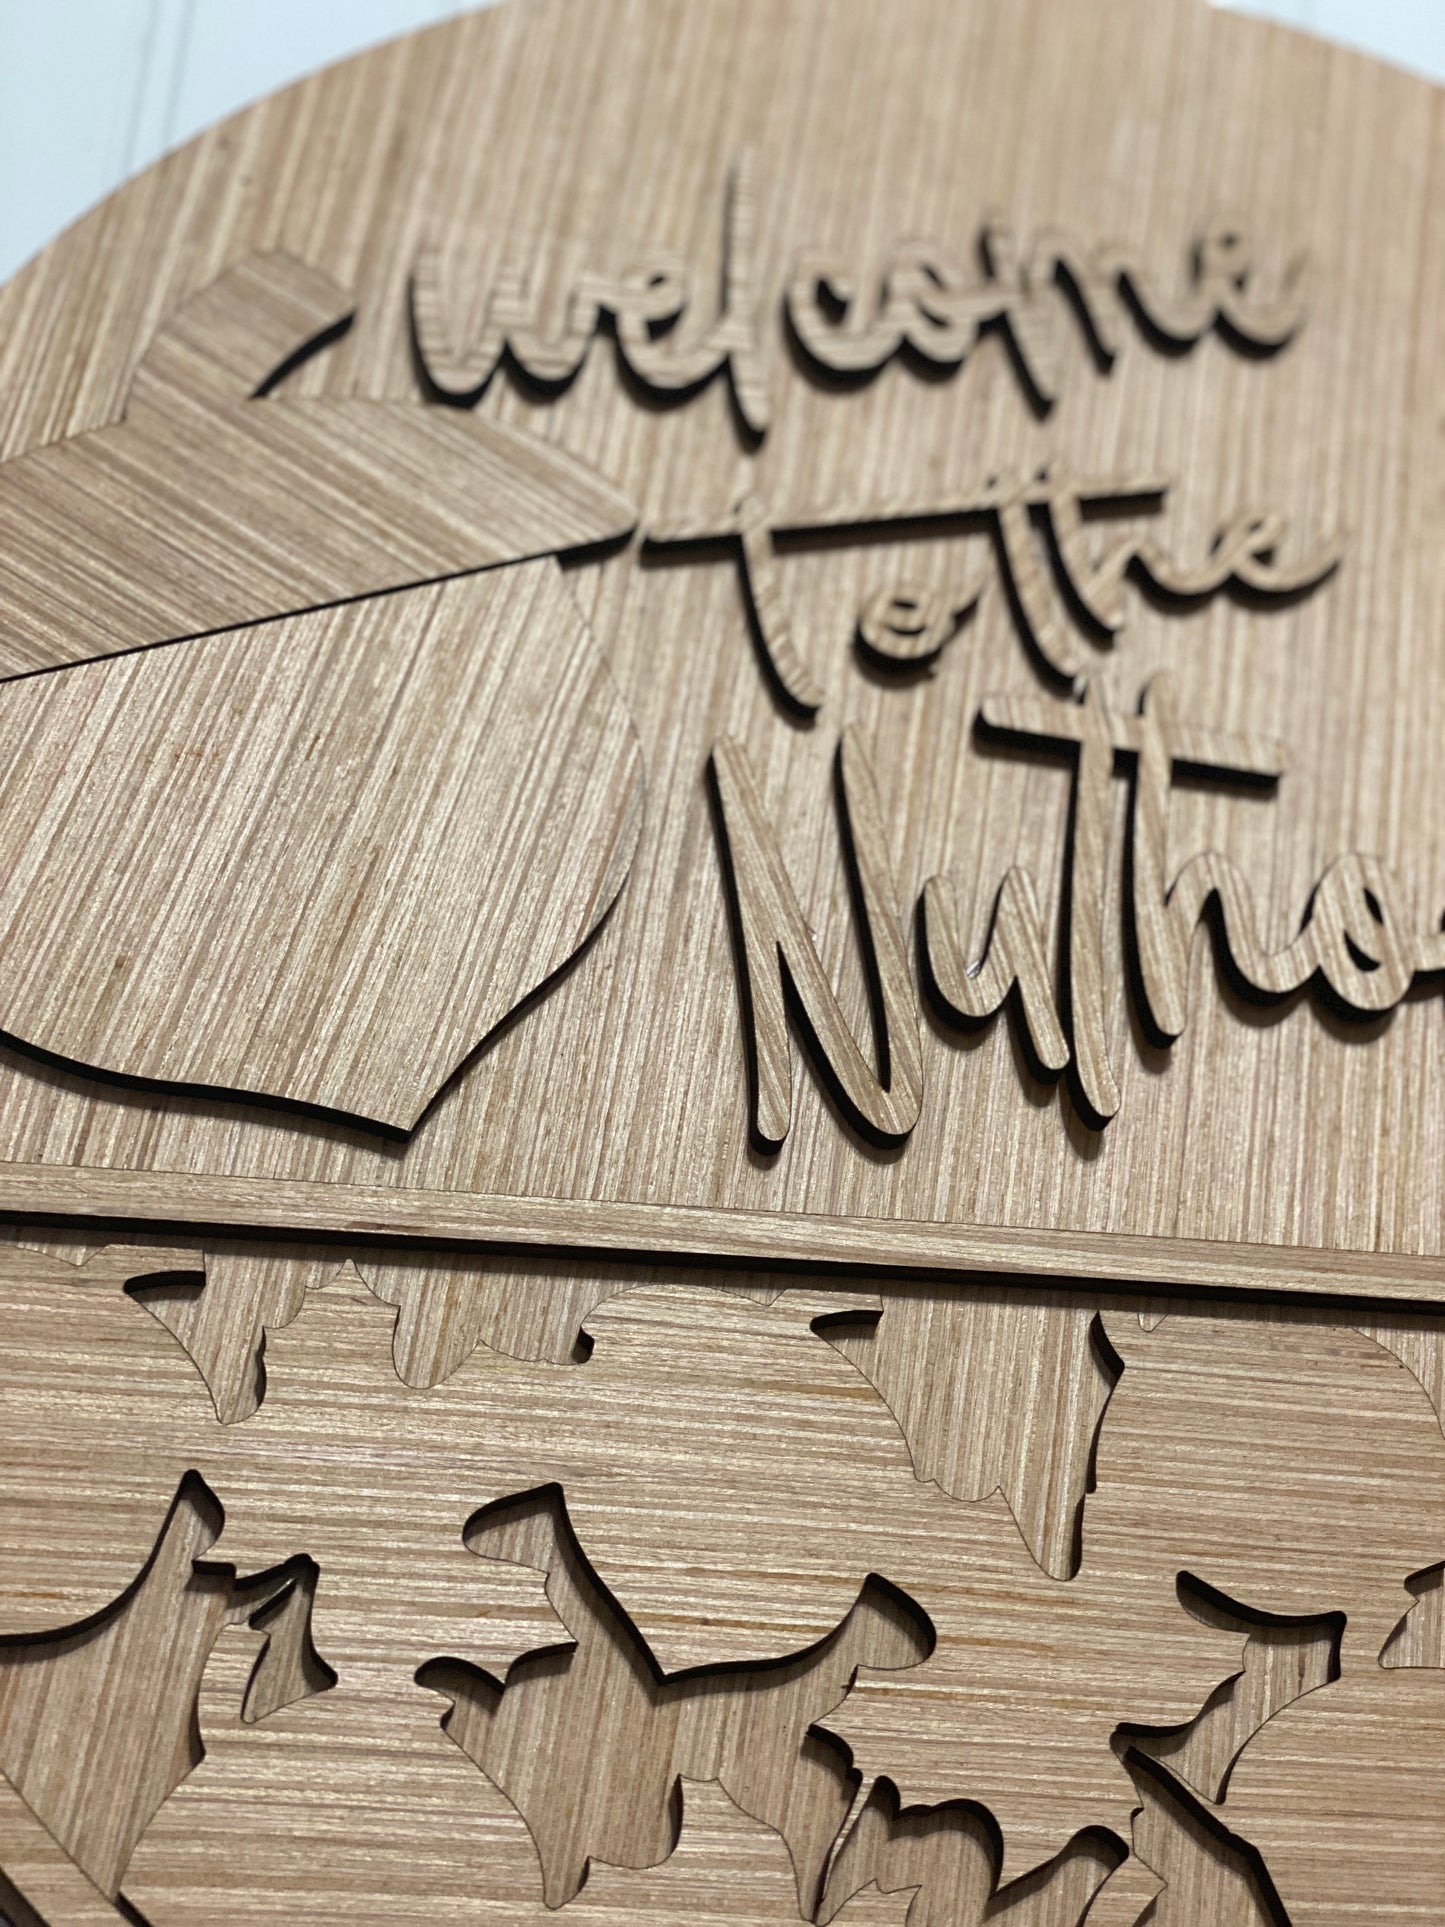 Welcome to the Nuthouse Door Hanger Laser Cut / Engraved Wooden Blank